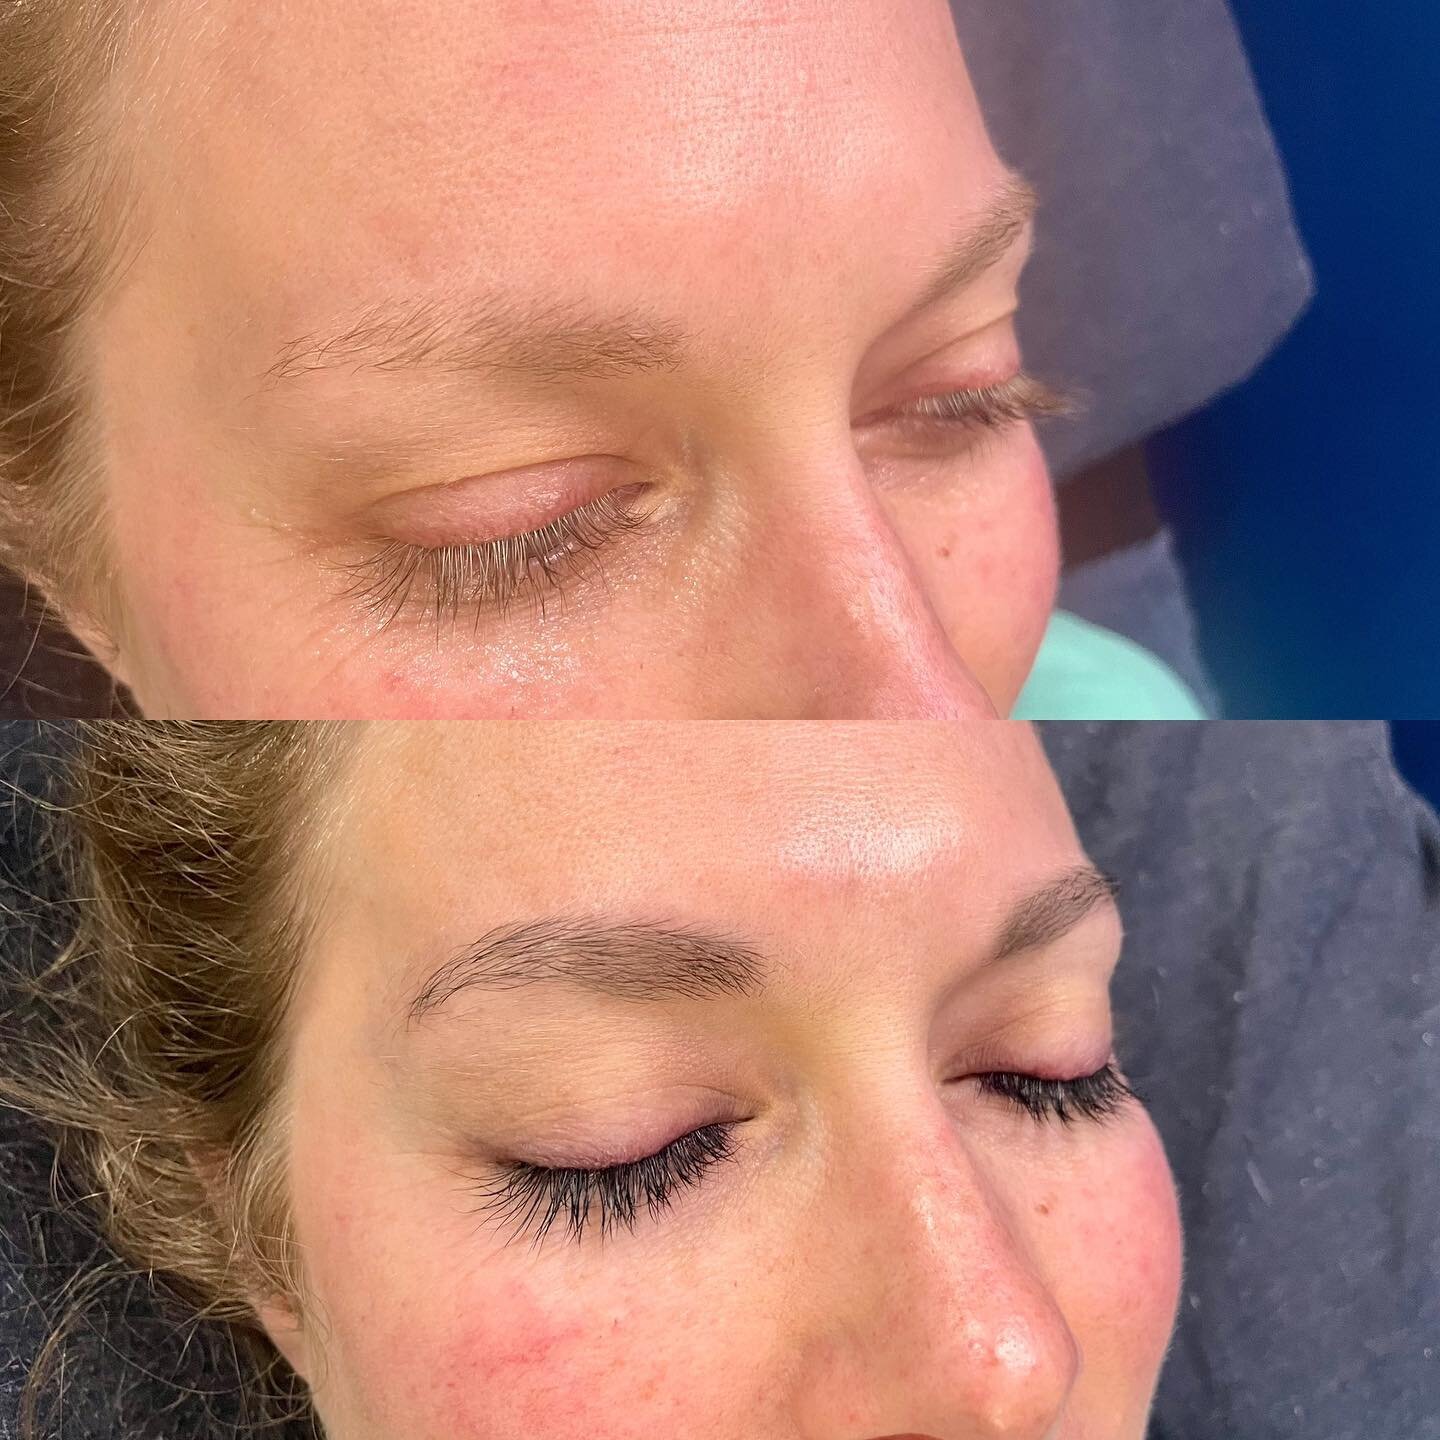 Wake up your eye&rsquo;s with a Lash and Brow tint&hellip;!
*
*
*
Lash Tint &euro;15
brow tint &euro;10
Brow shape &euro;10
All three &euro;30
*
*
*
Please book on FB @thebeautyspotmorzine to book an appointment. The Beauty Spot Morzine will be opene